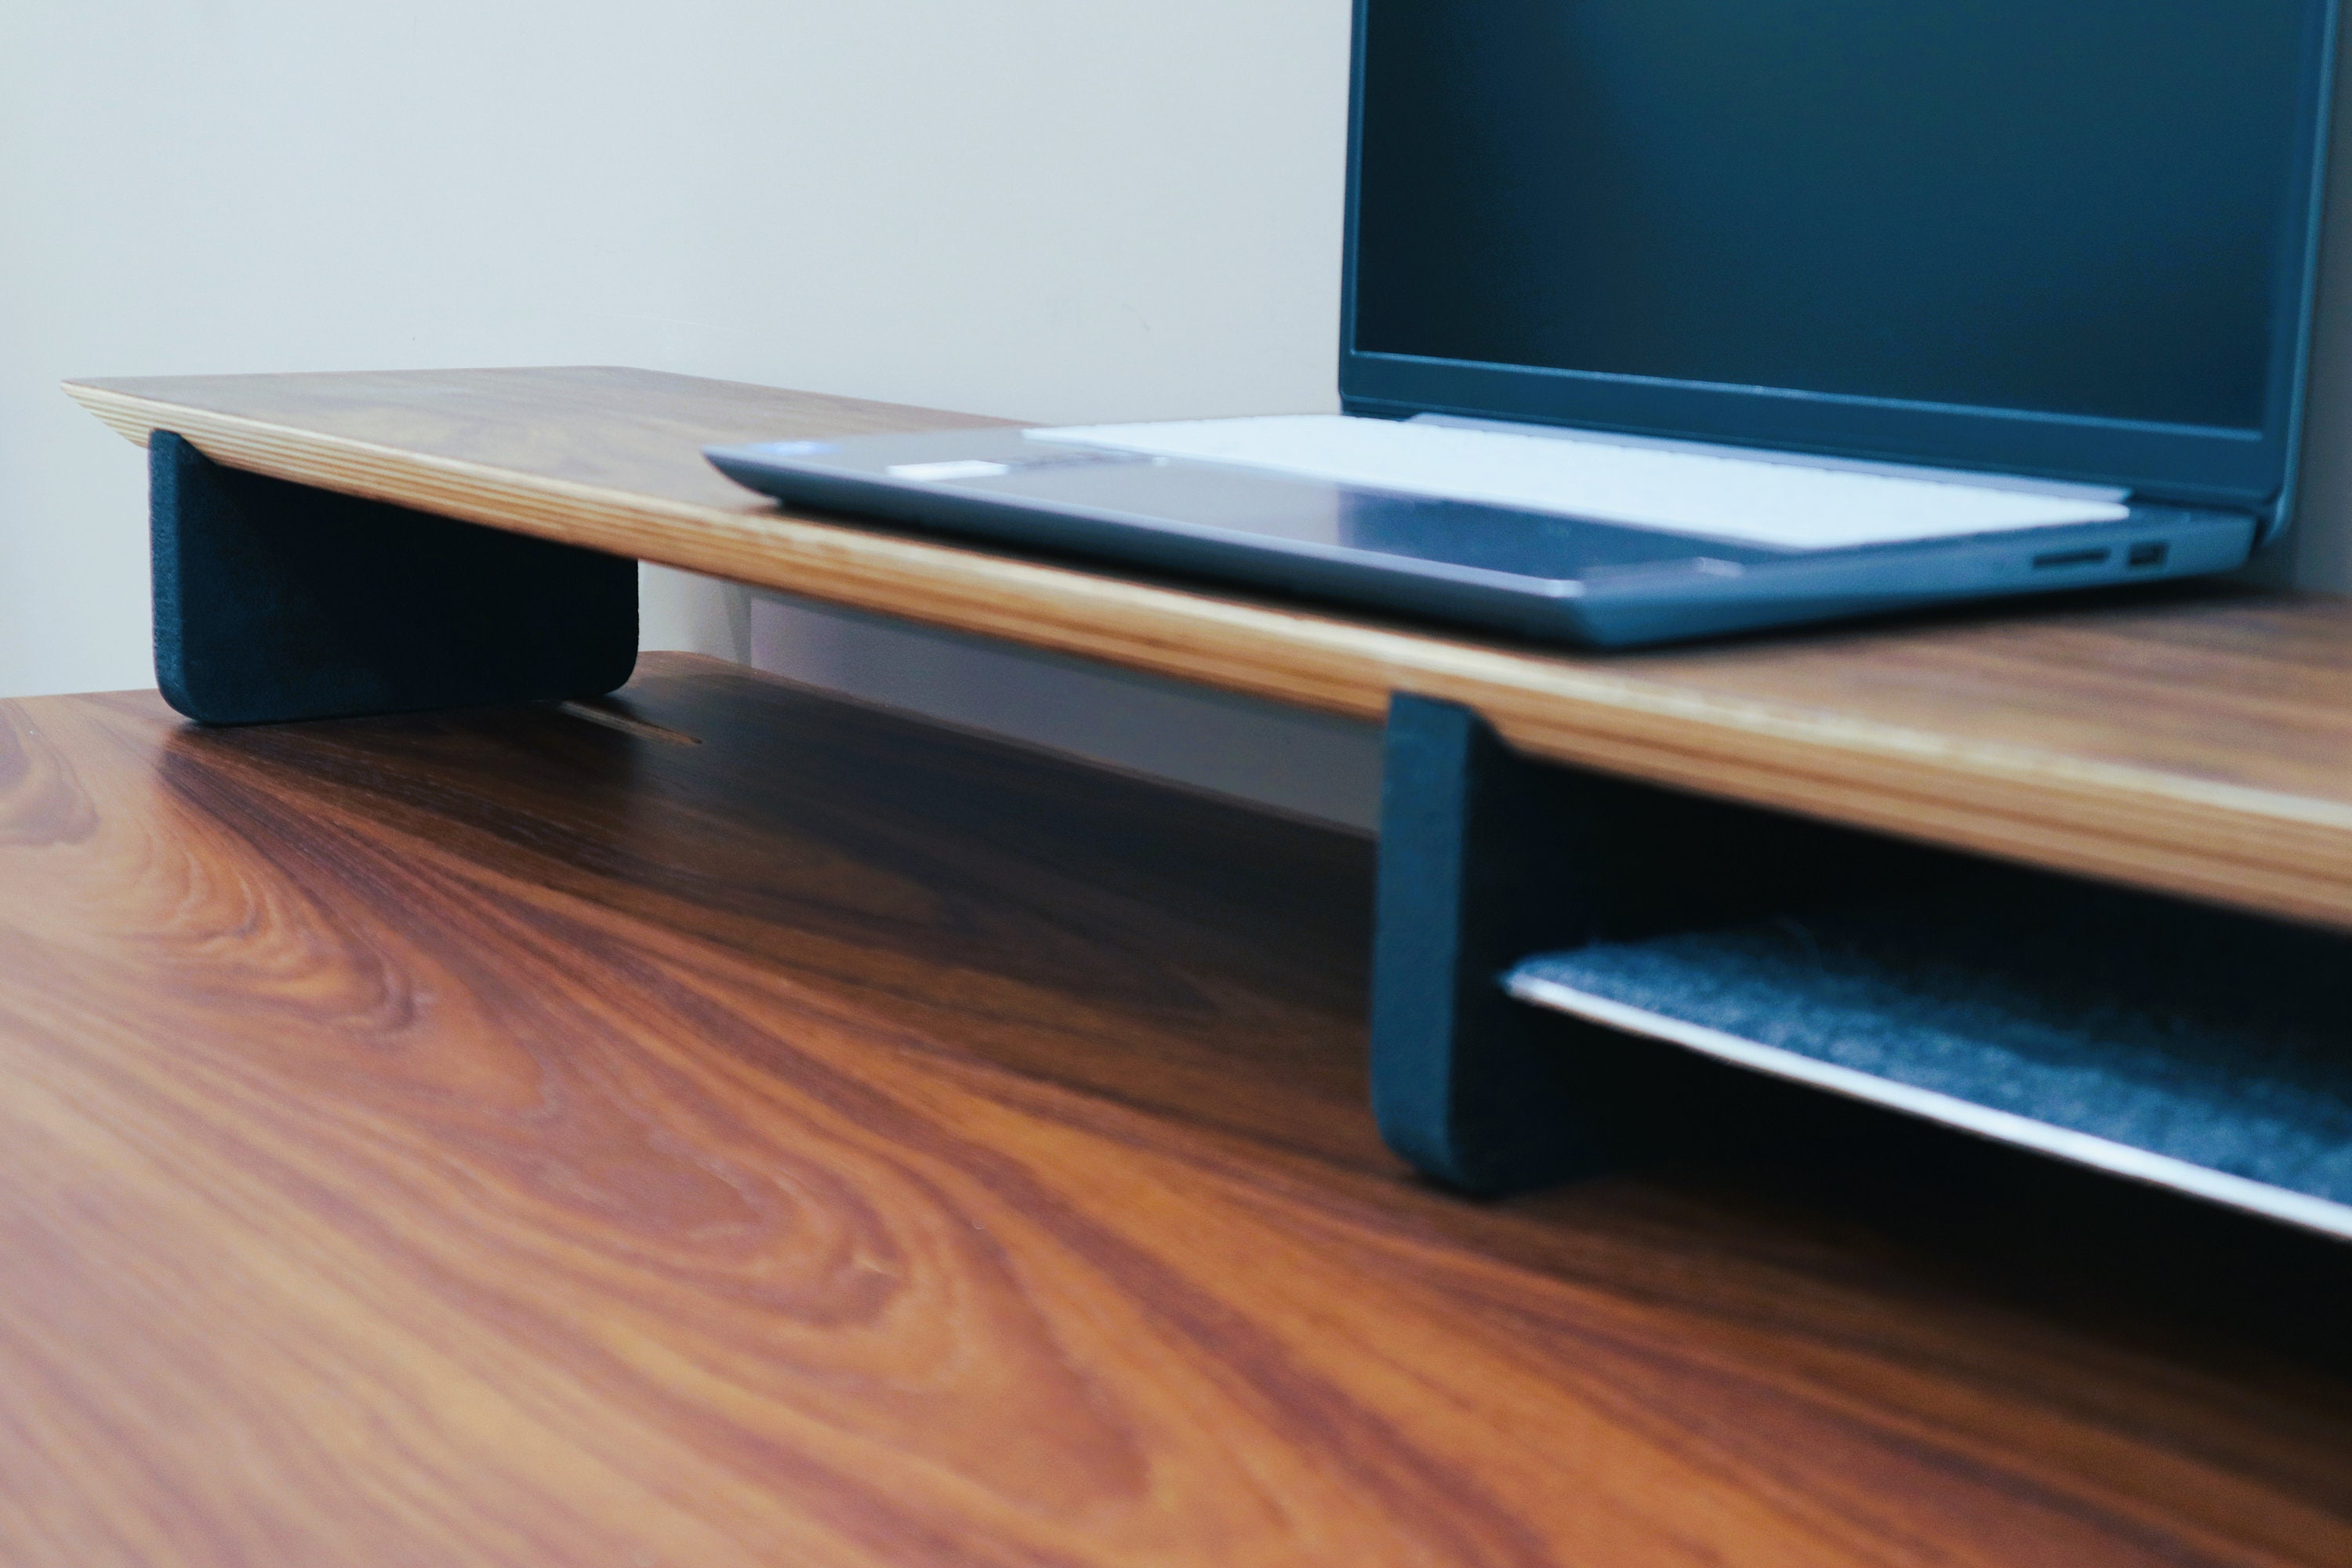 Grovemade's gorgeous new Desk Shelf with cork accents - 9to5Toys